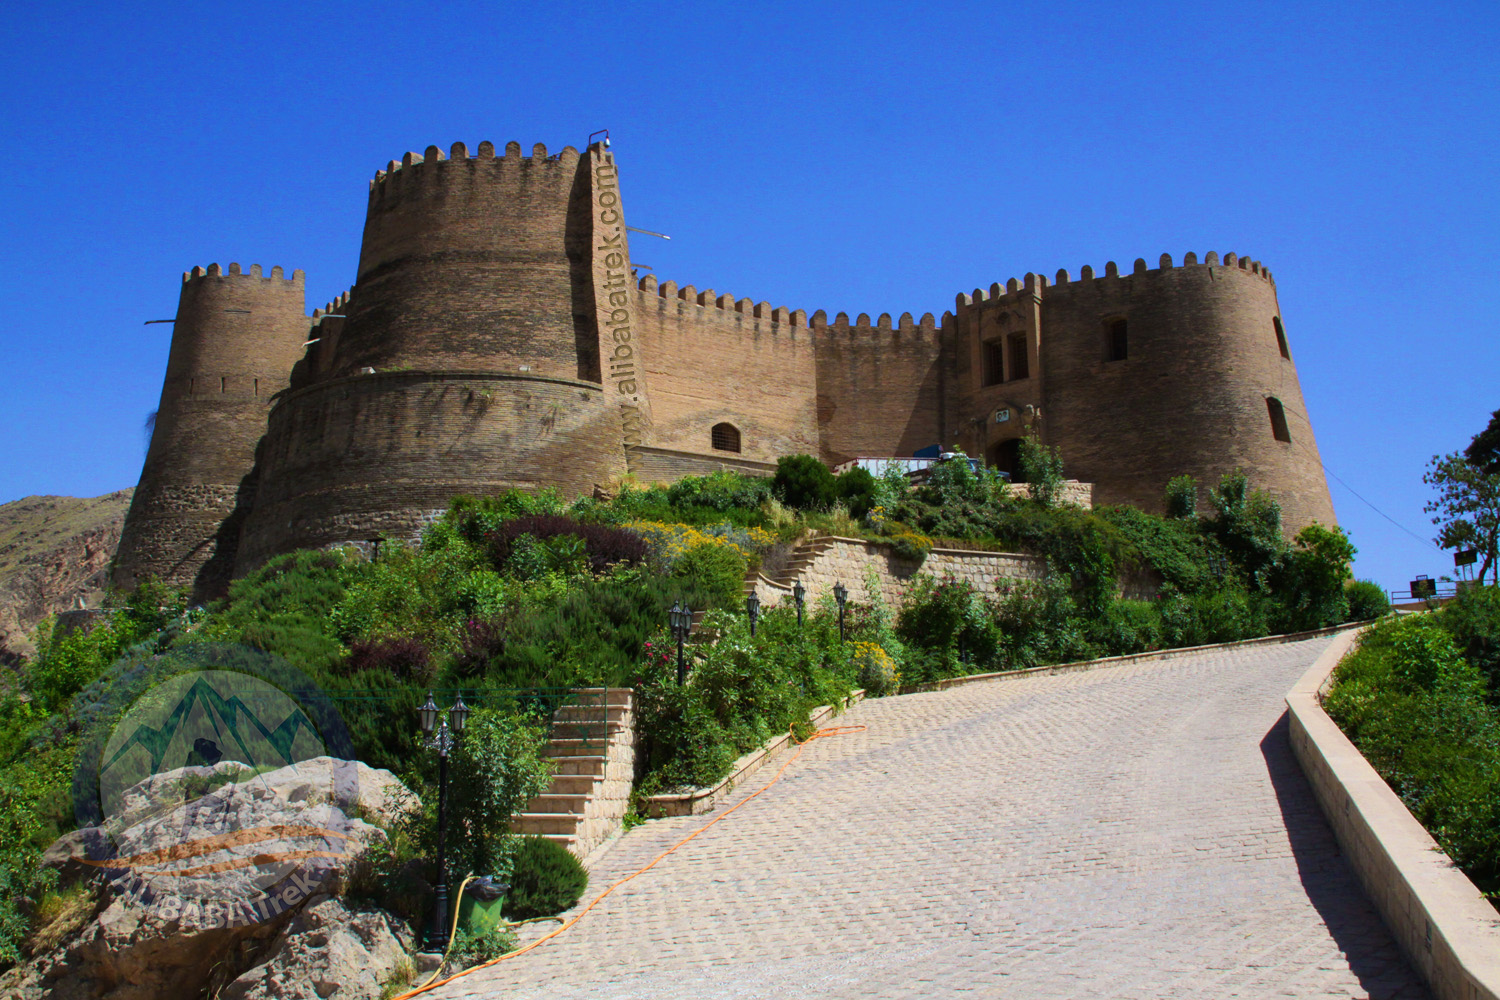 Falak-Ol-Aflak This unmissable eight-towered castle dominates the city centre from a rocky promontory.